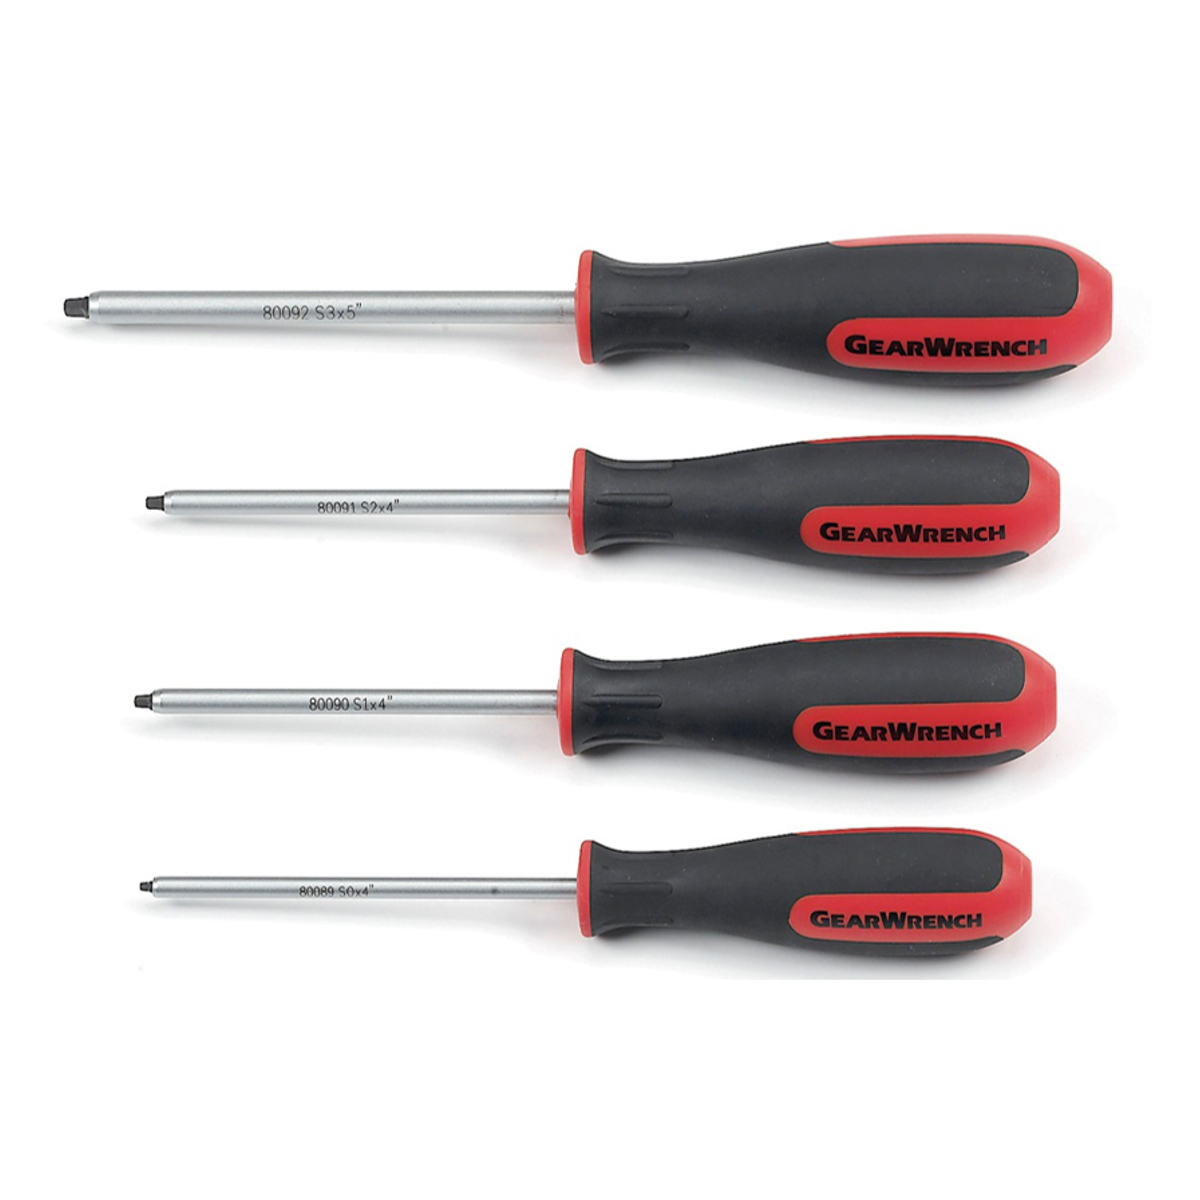 christmas-gift-ideas-for-car-and-diy-lover/images/Screwdrivers-partsavatar-canada.jpeg